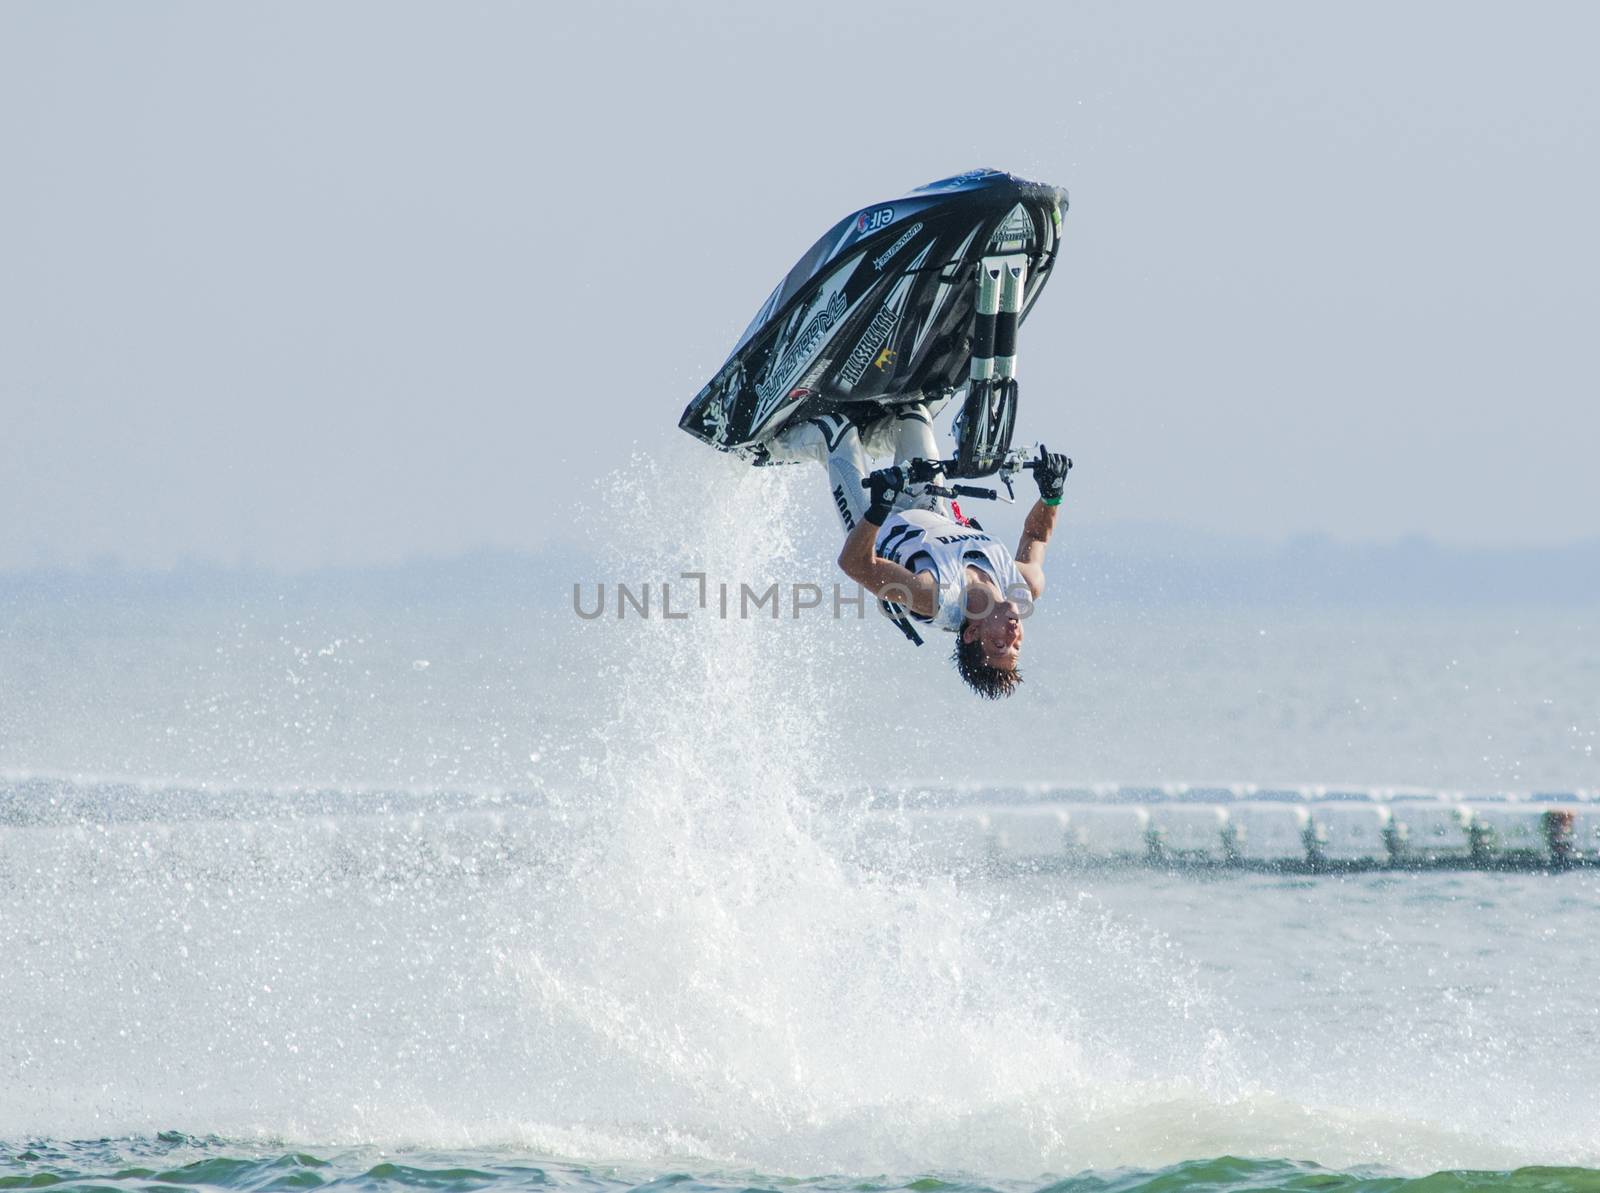 Pattaya, Thailand - December 6, 2015: Taiji Yamamoto from Japan during his performance at the freestyle competition during the International Jet Ski World Cup at Jomtien Beach, Pattaya, Thailand.